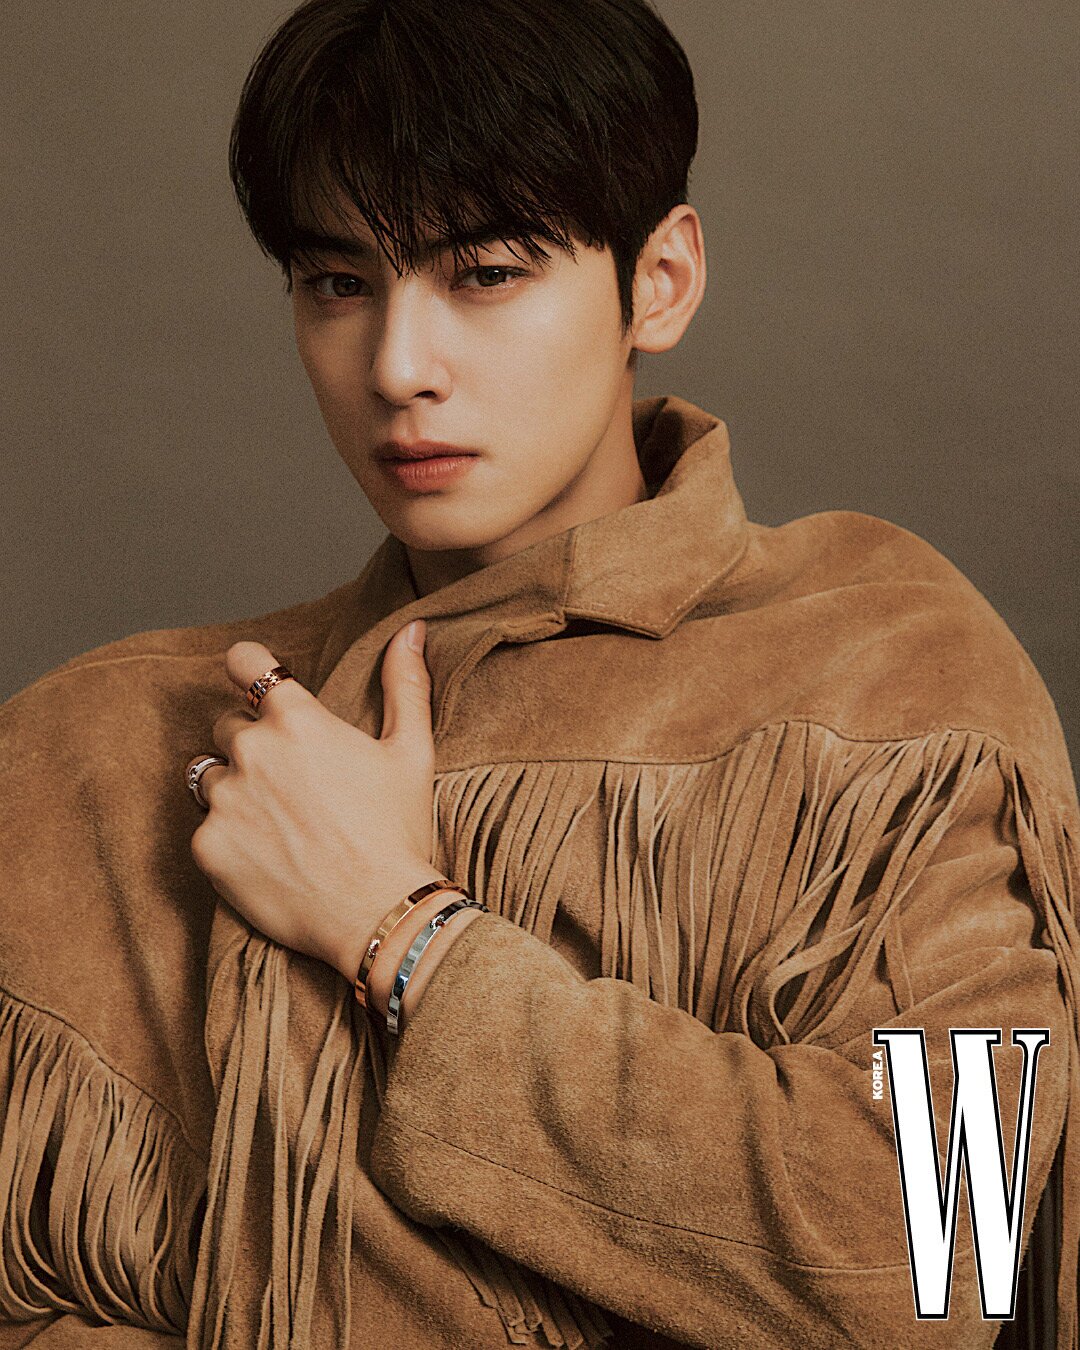 Cha Eun-woo's look for the Chaumet pop-up store event in Seoul wins the  internet: The prince of Chaumet is back